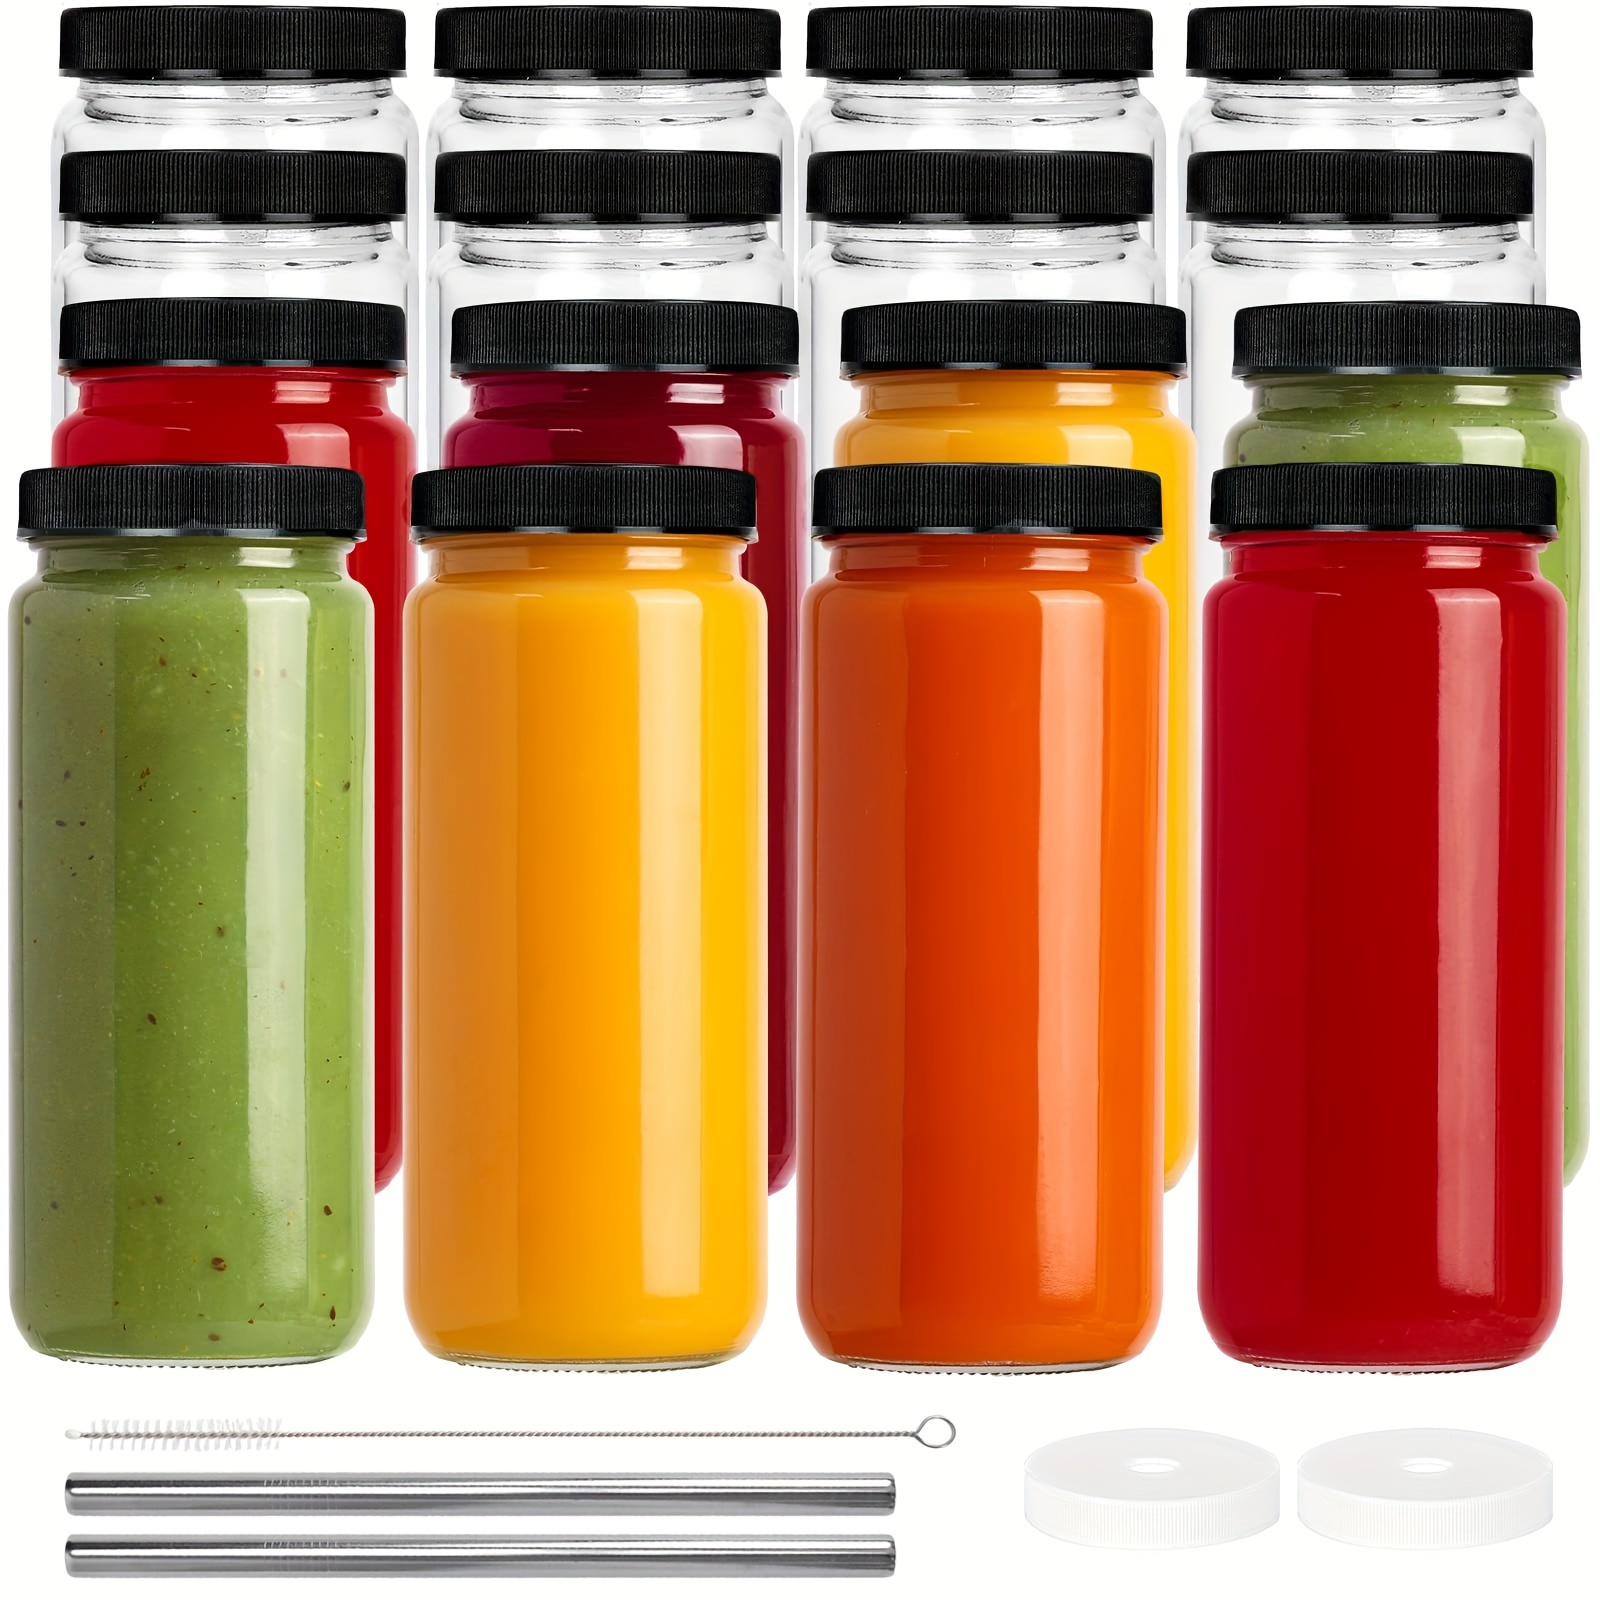 Glass Juicing Bottles With 2 Straws 2 Lids W Holes Reusable - Temu